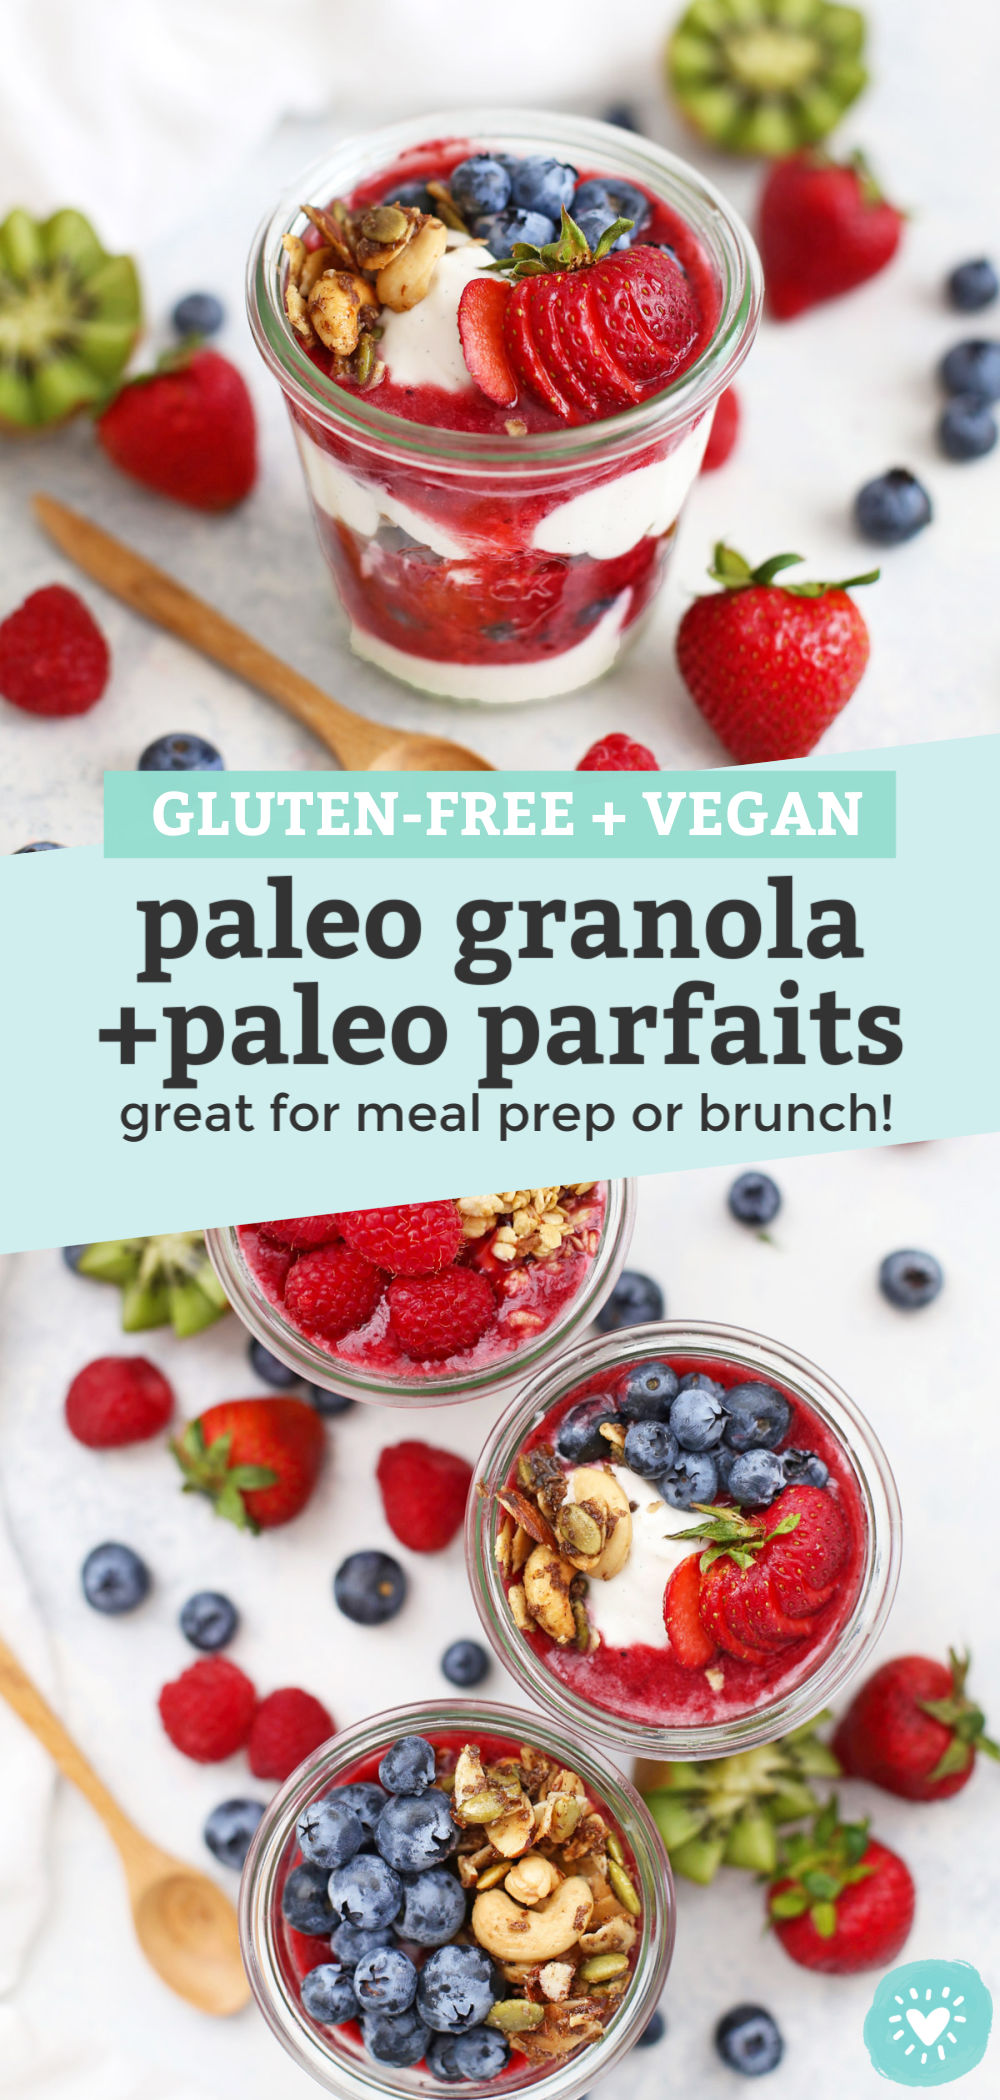 Collage of images of jars of paleo granola parfats with berry puree, fresh fruit, yogurt, and kiwi with text overlay that reads "Gluten-Free + Vegan Paleo Granola + Paleo Parfaits--great for meal prep or brunch!"